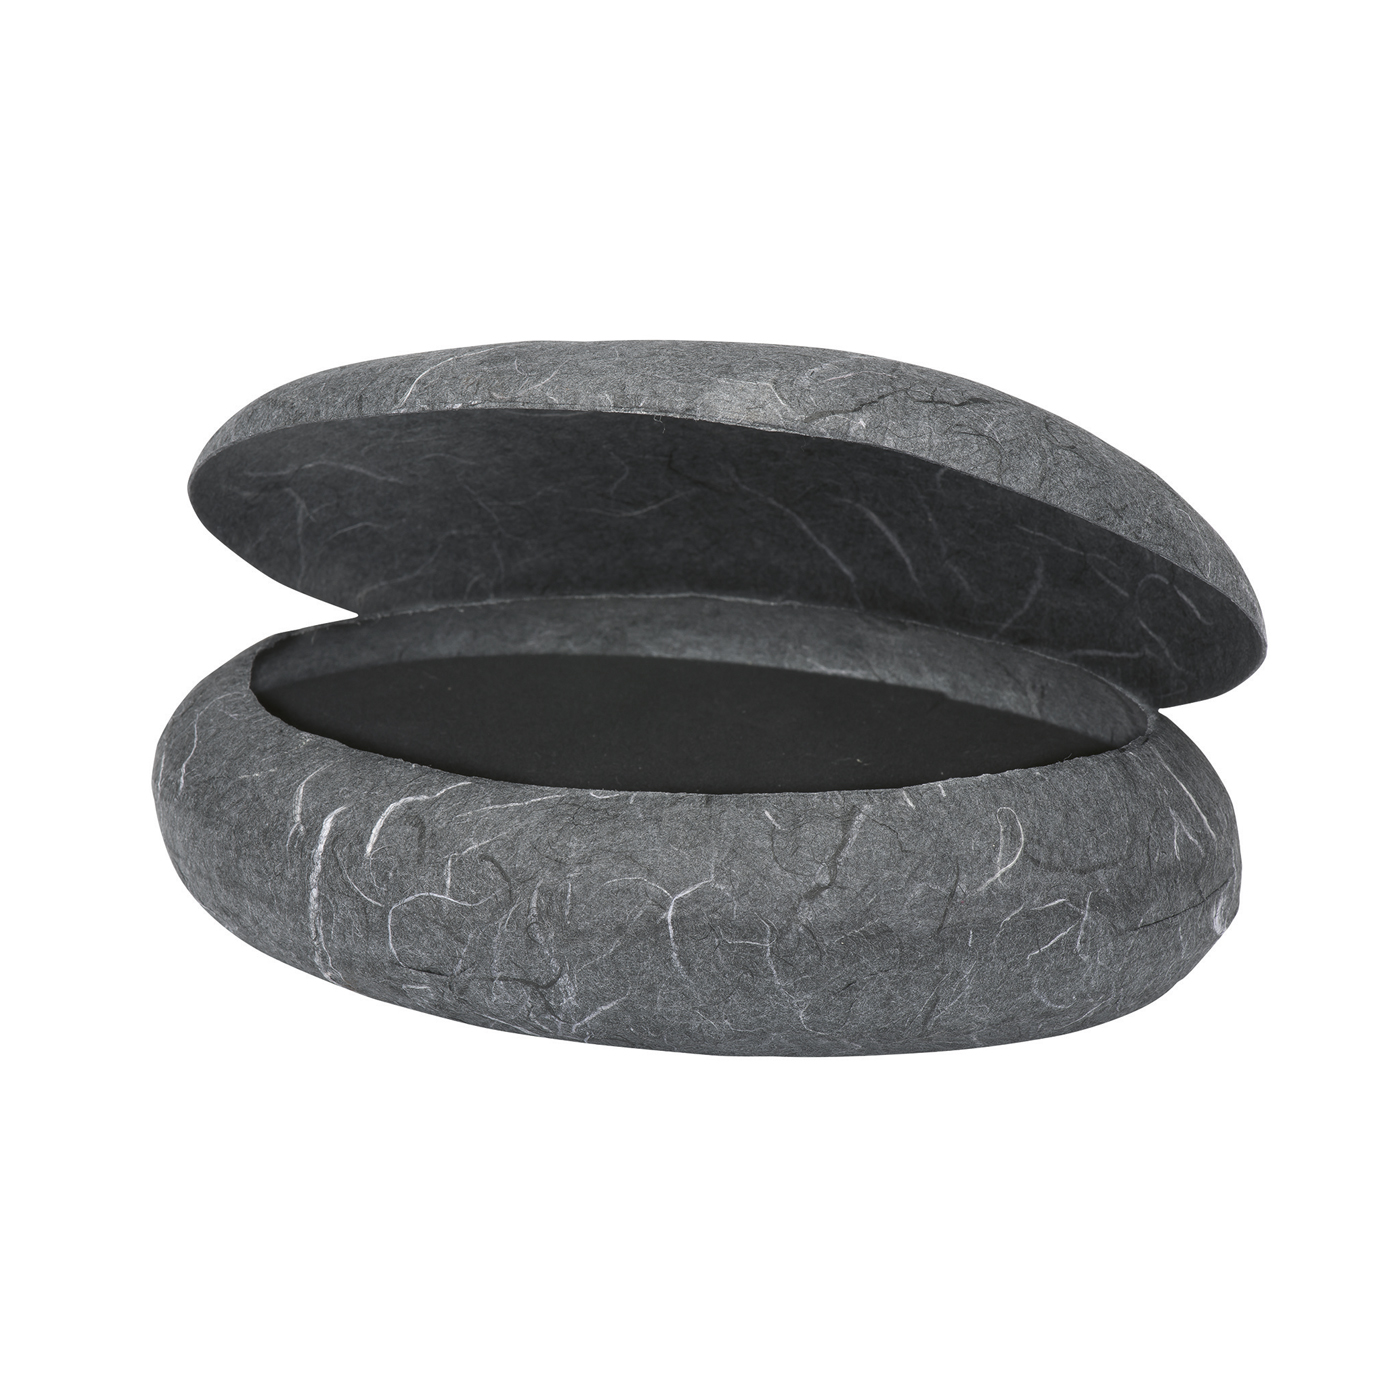 Jewellery Packaging "Stone", Anthracite Mottled,170x110x60mm - 1 piece